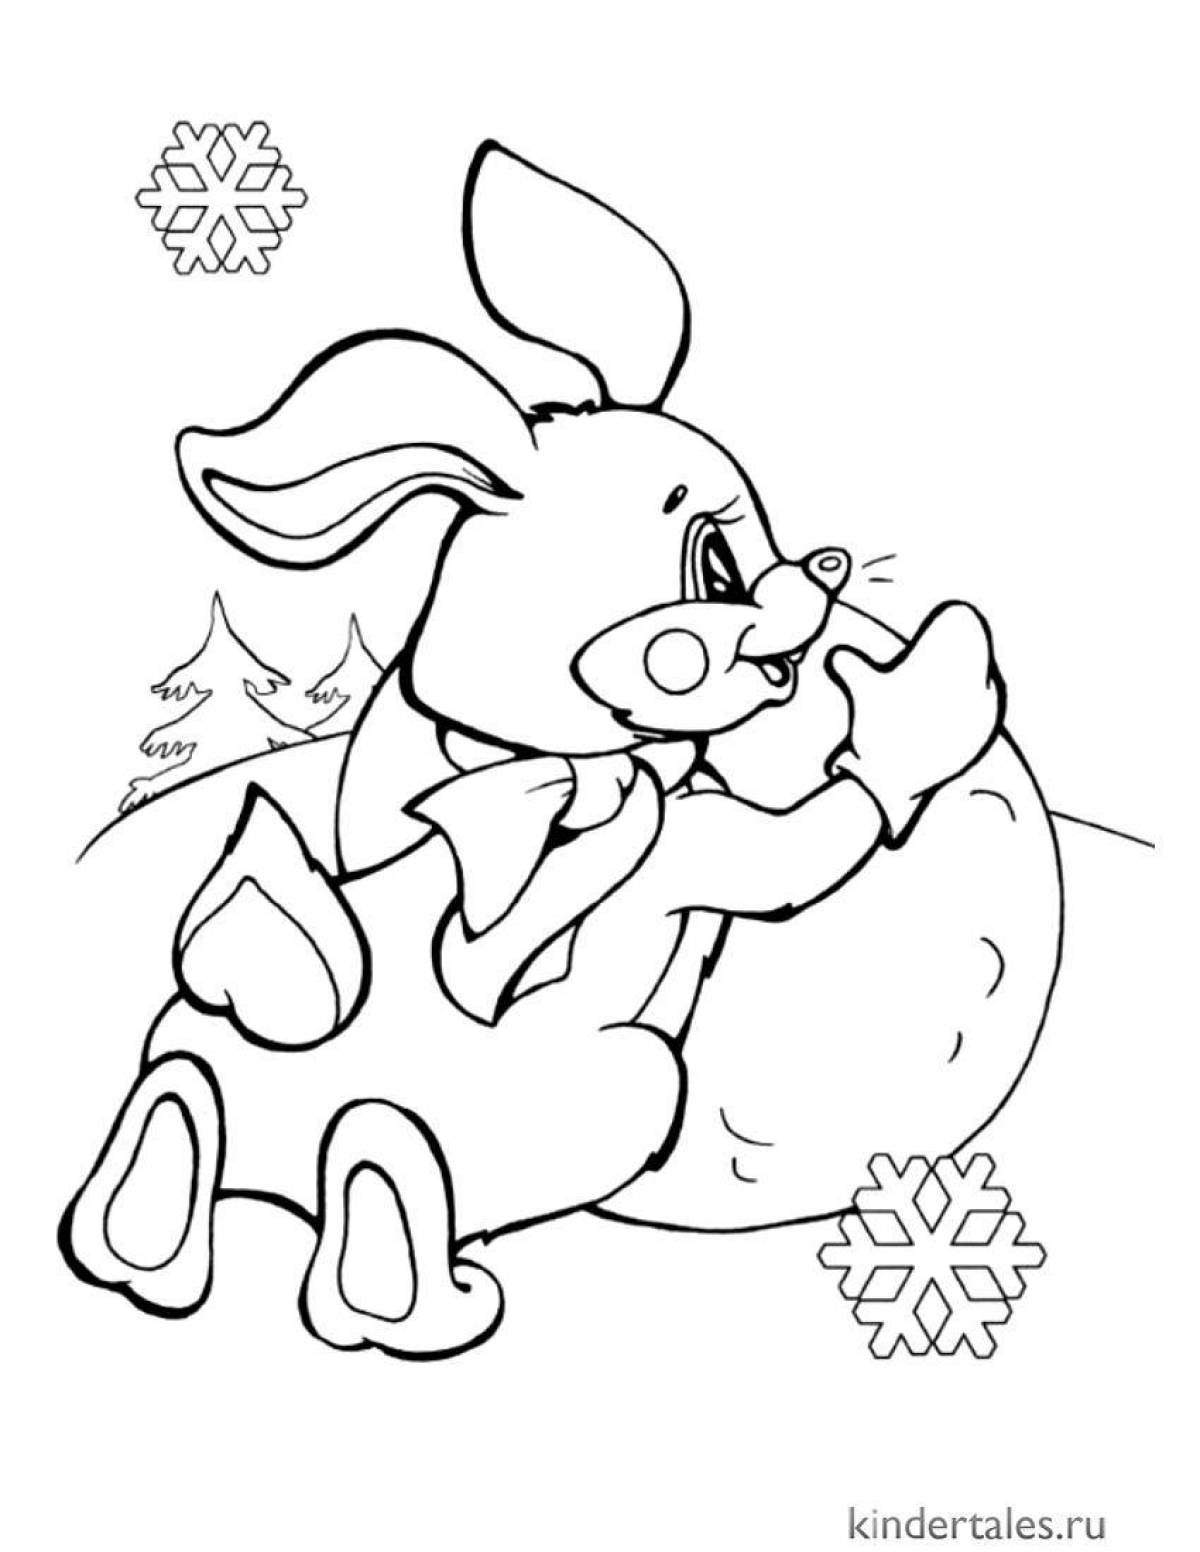 Hare and snowman coloring page